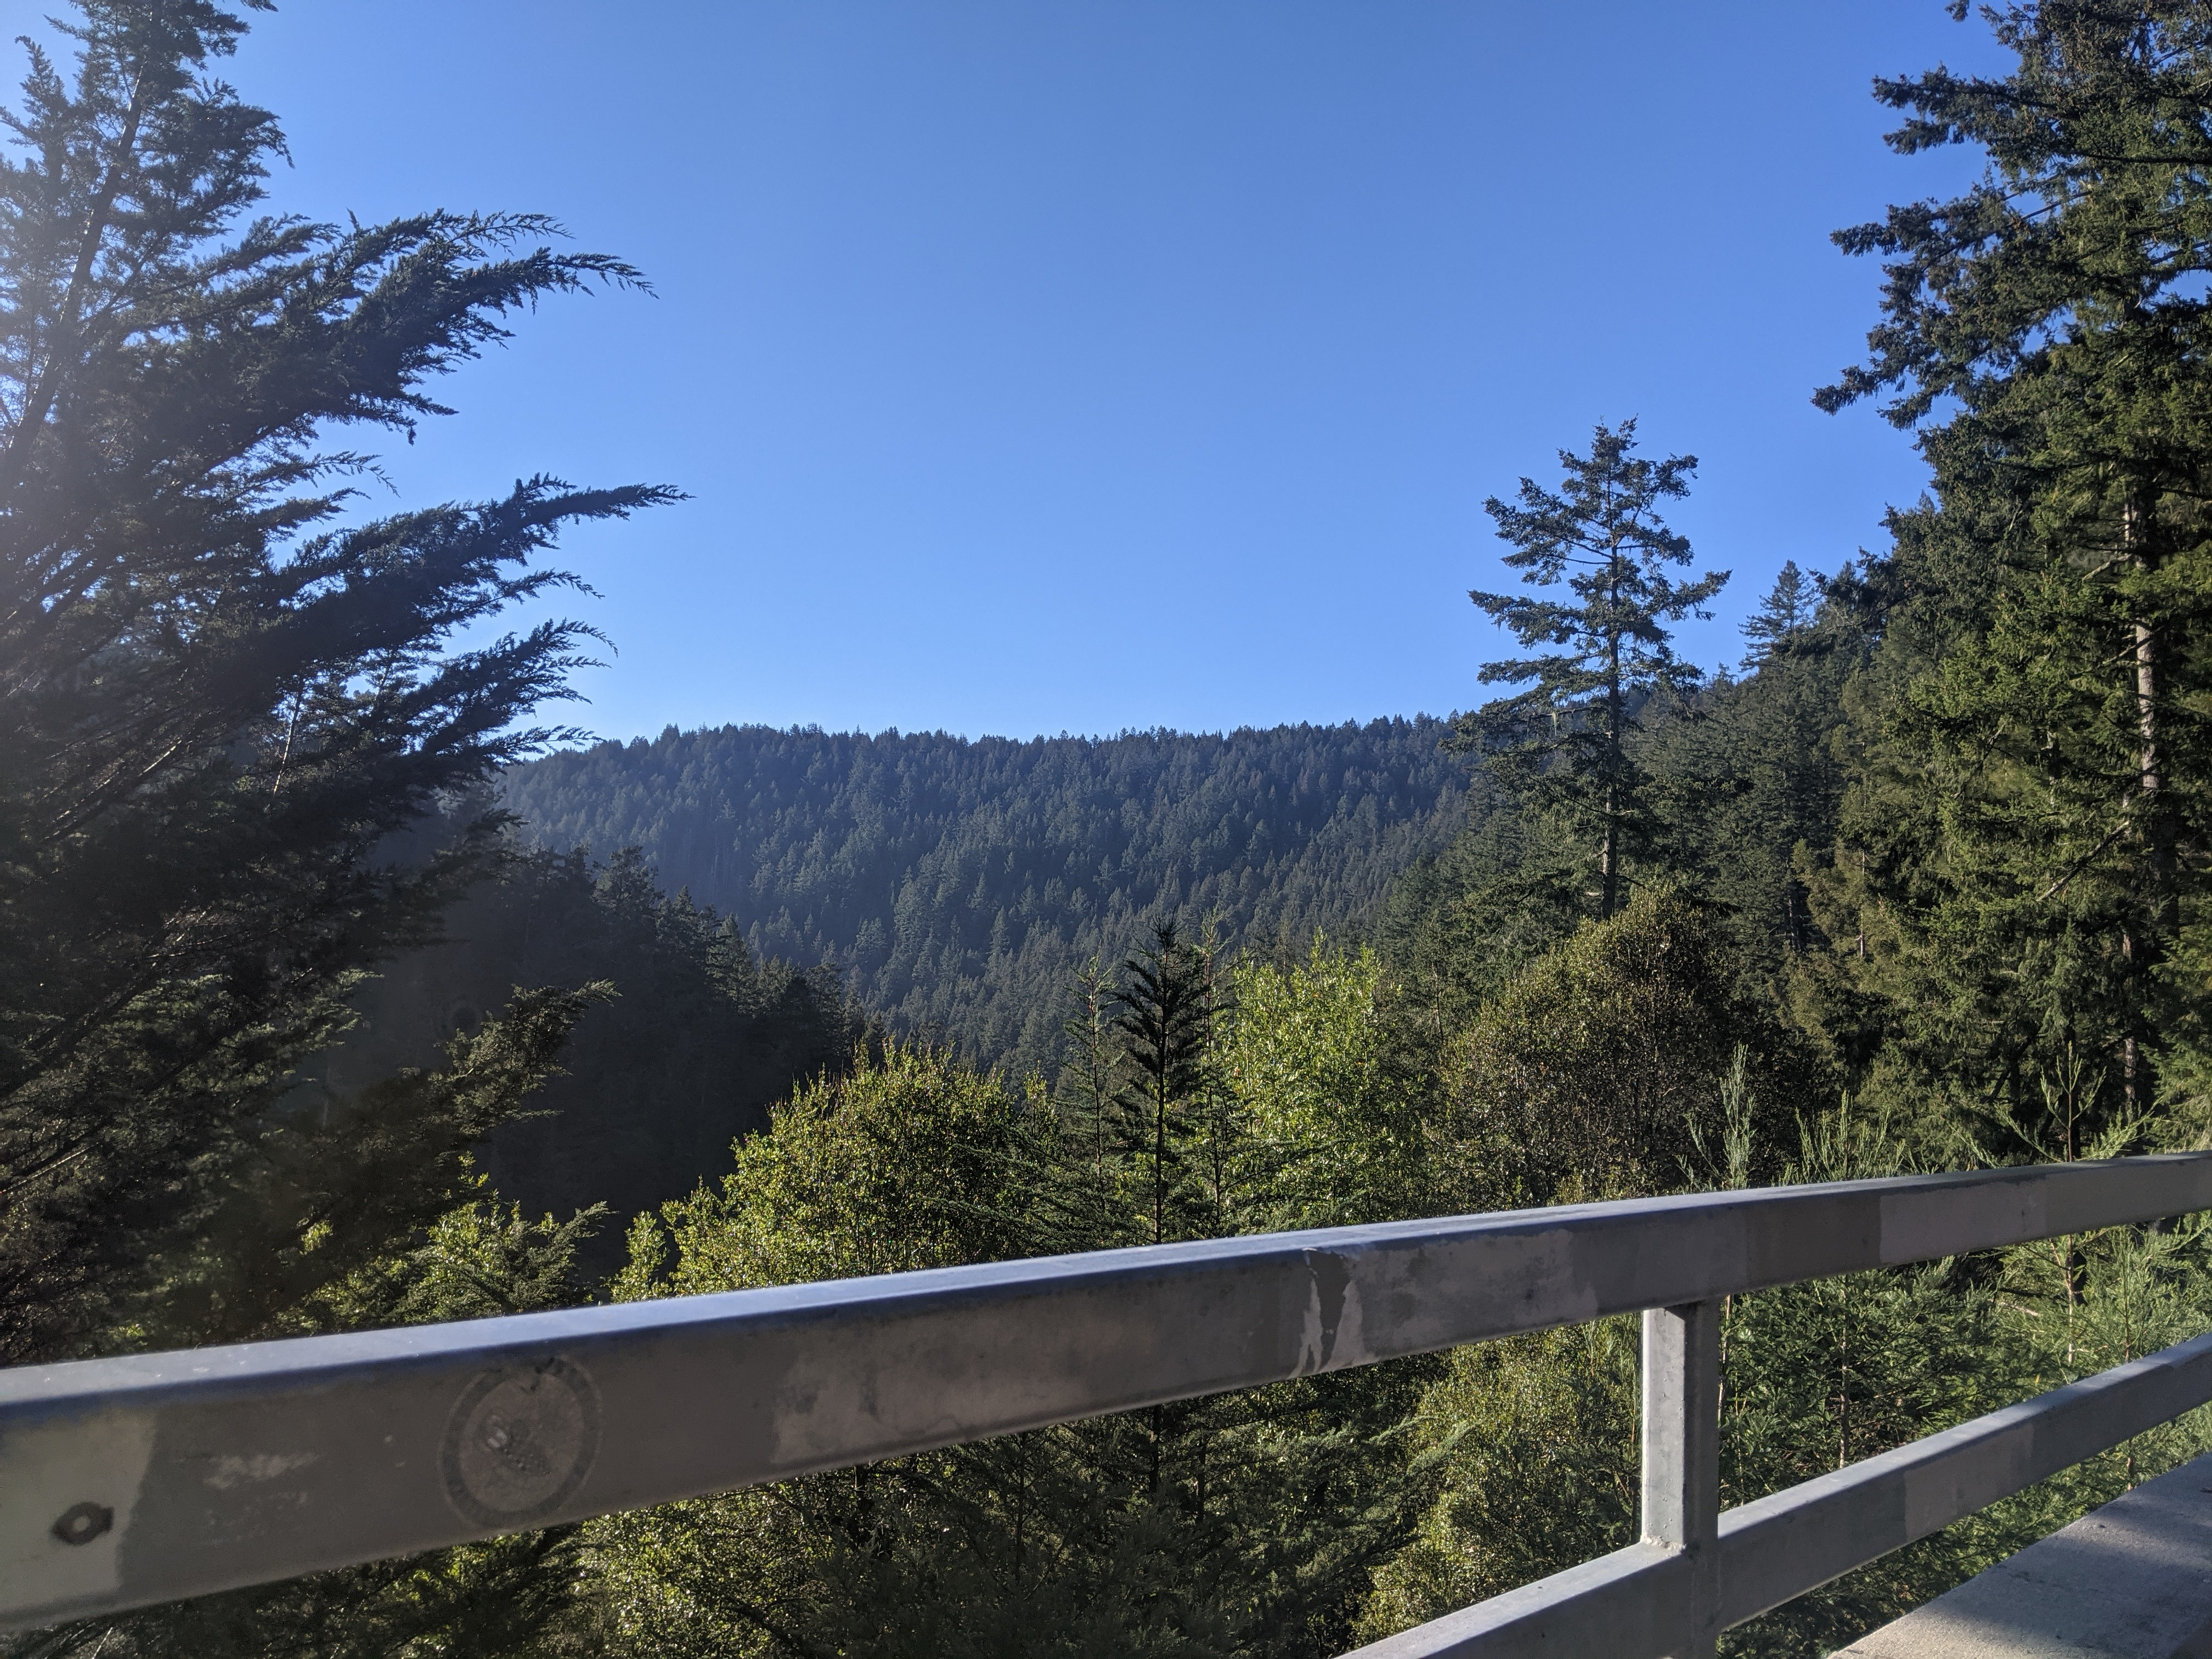 A photo of a mountainside full of trees, with a railing in the foreground.